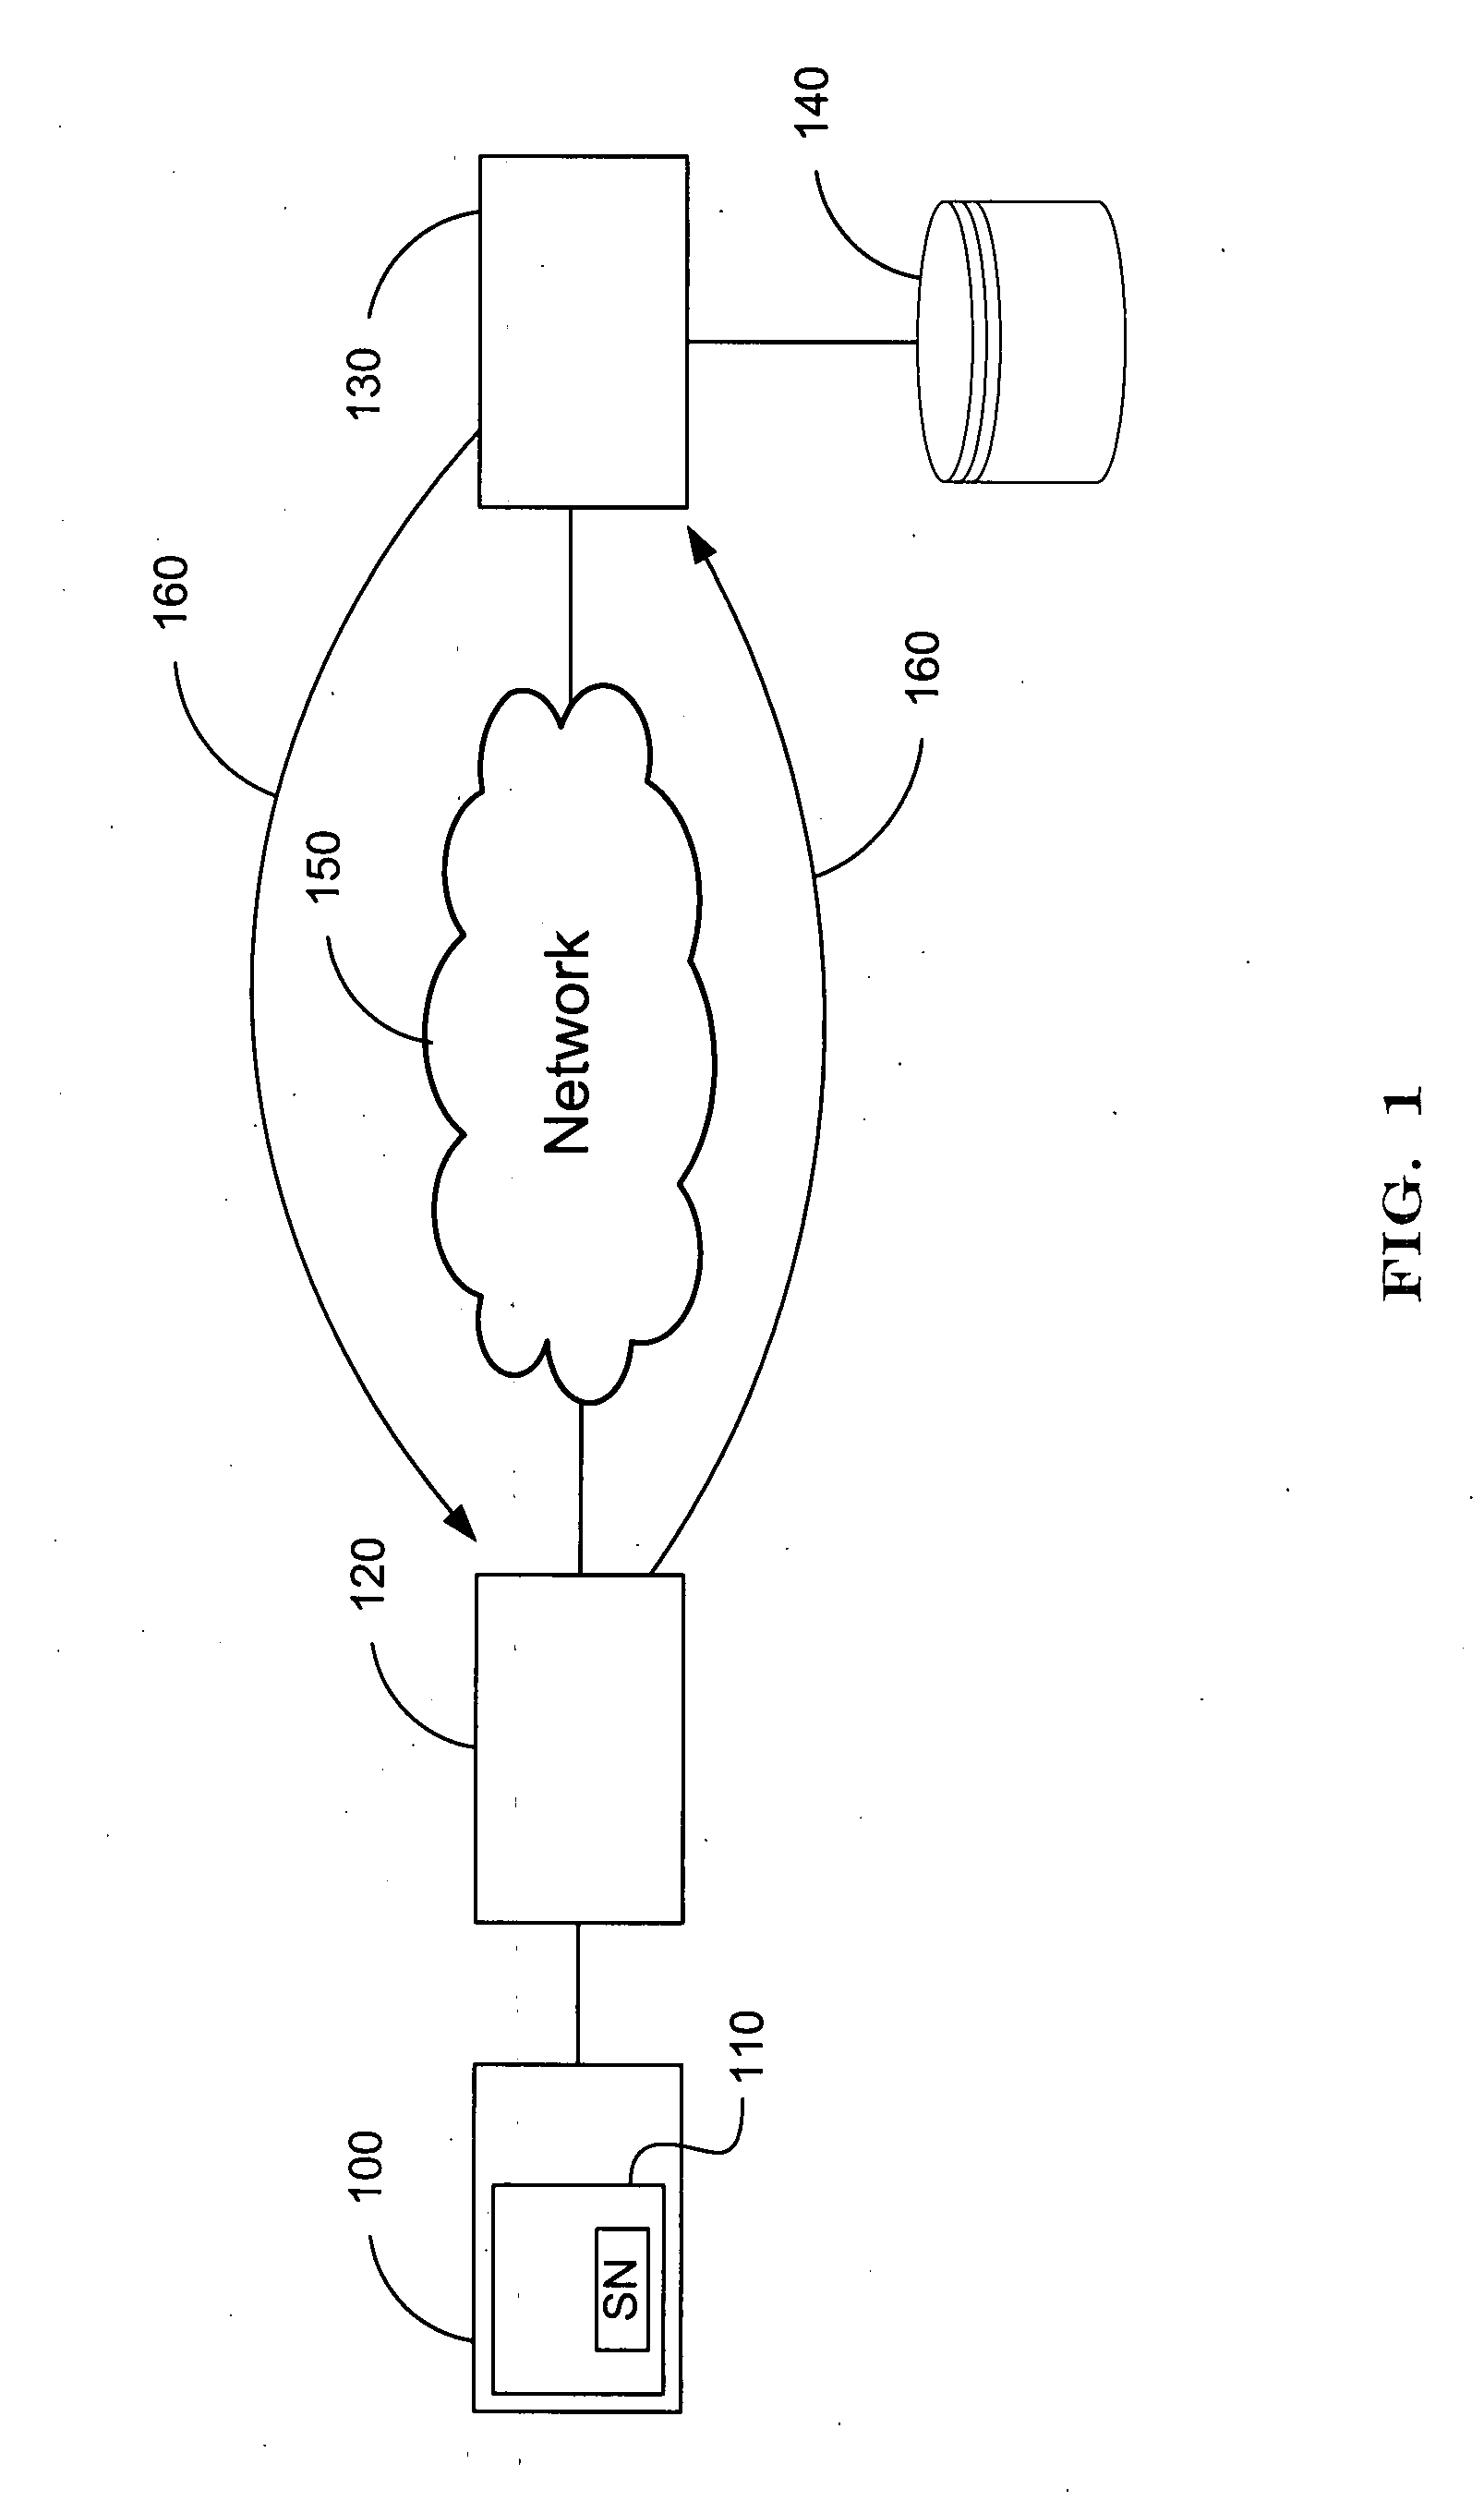 Systems and methods for controlling production quantities